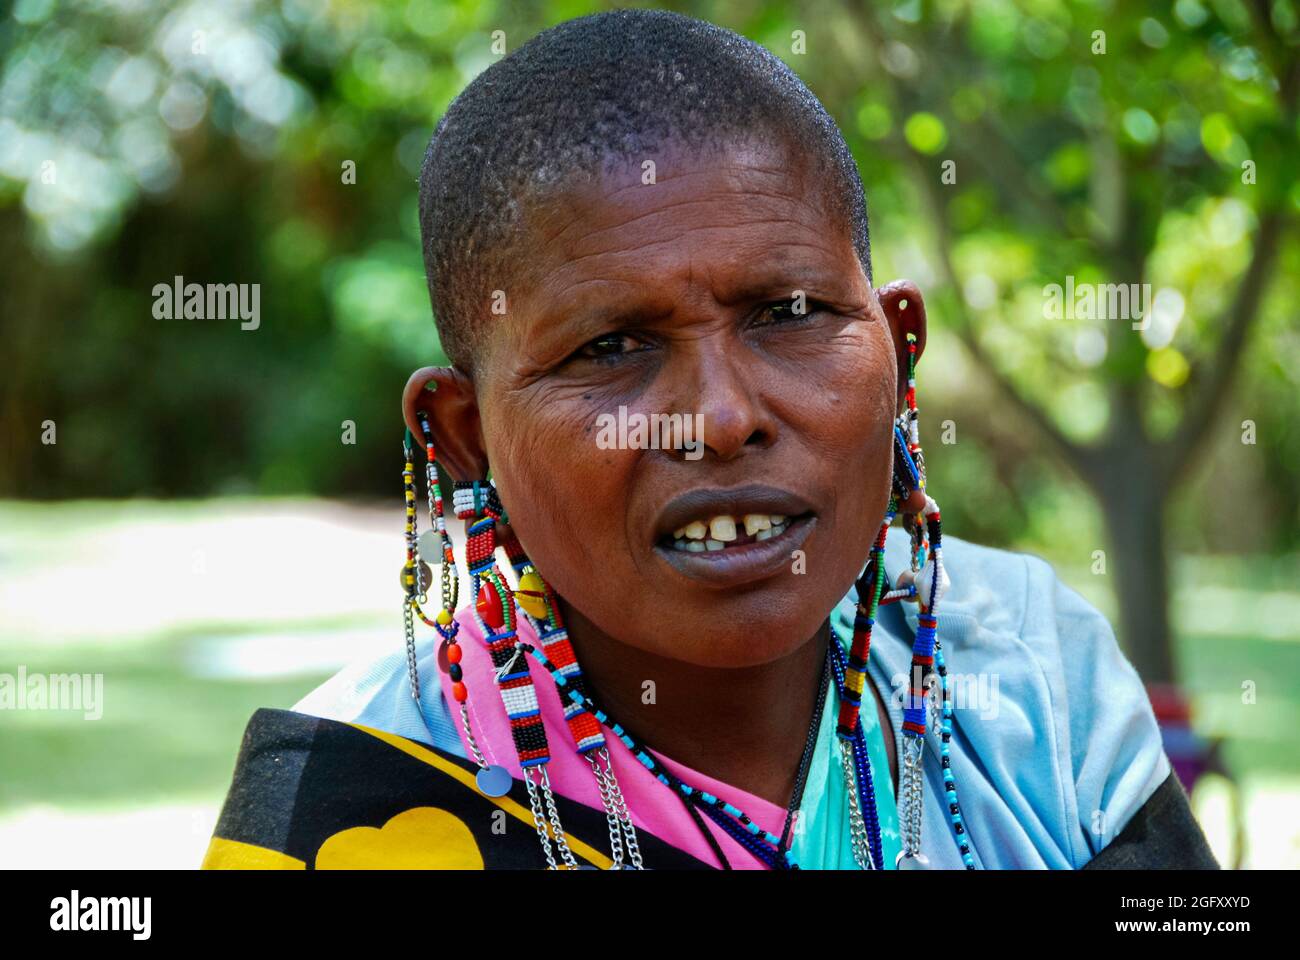 Portrait of a woman from the Masai Tribe in Kenya. Stock Photo